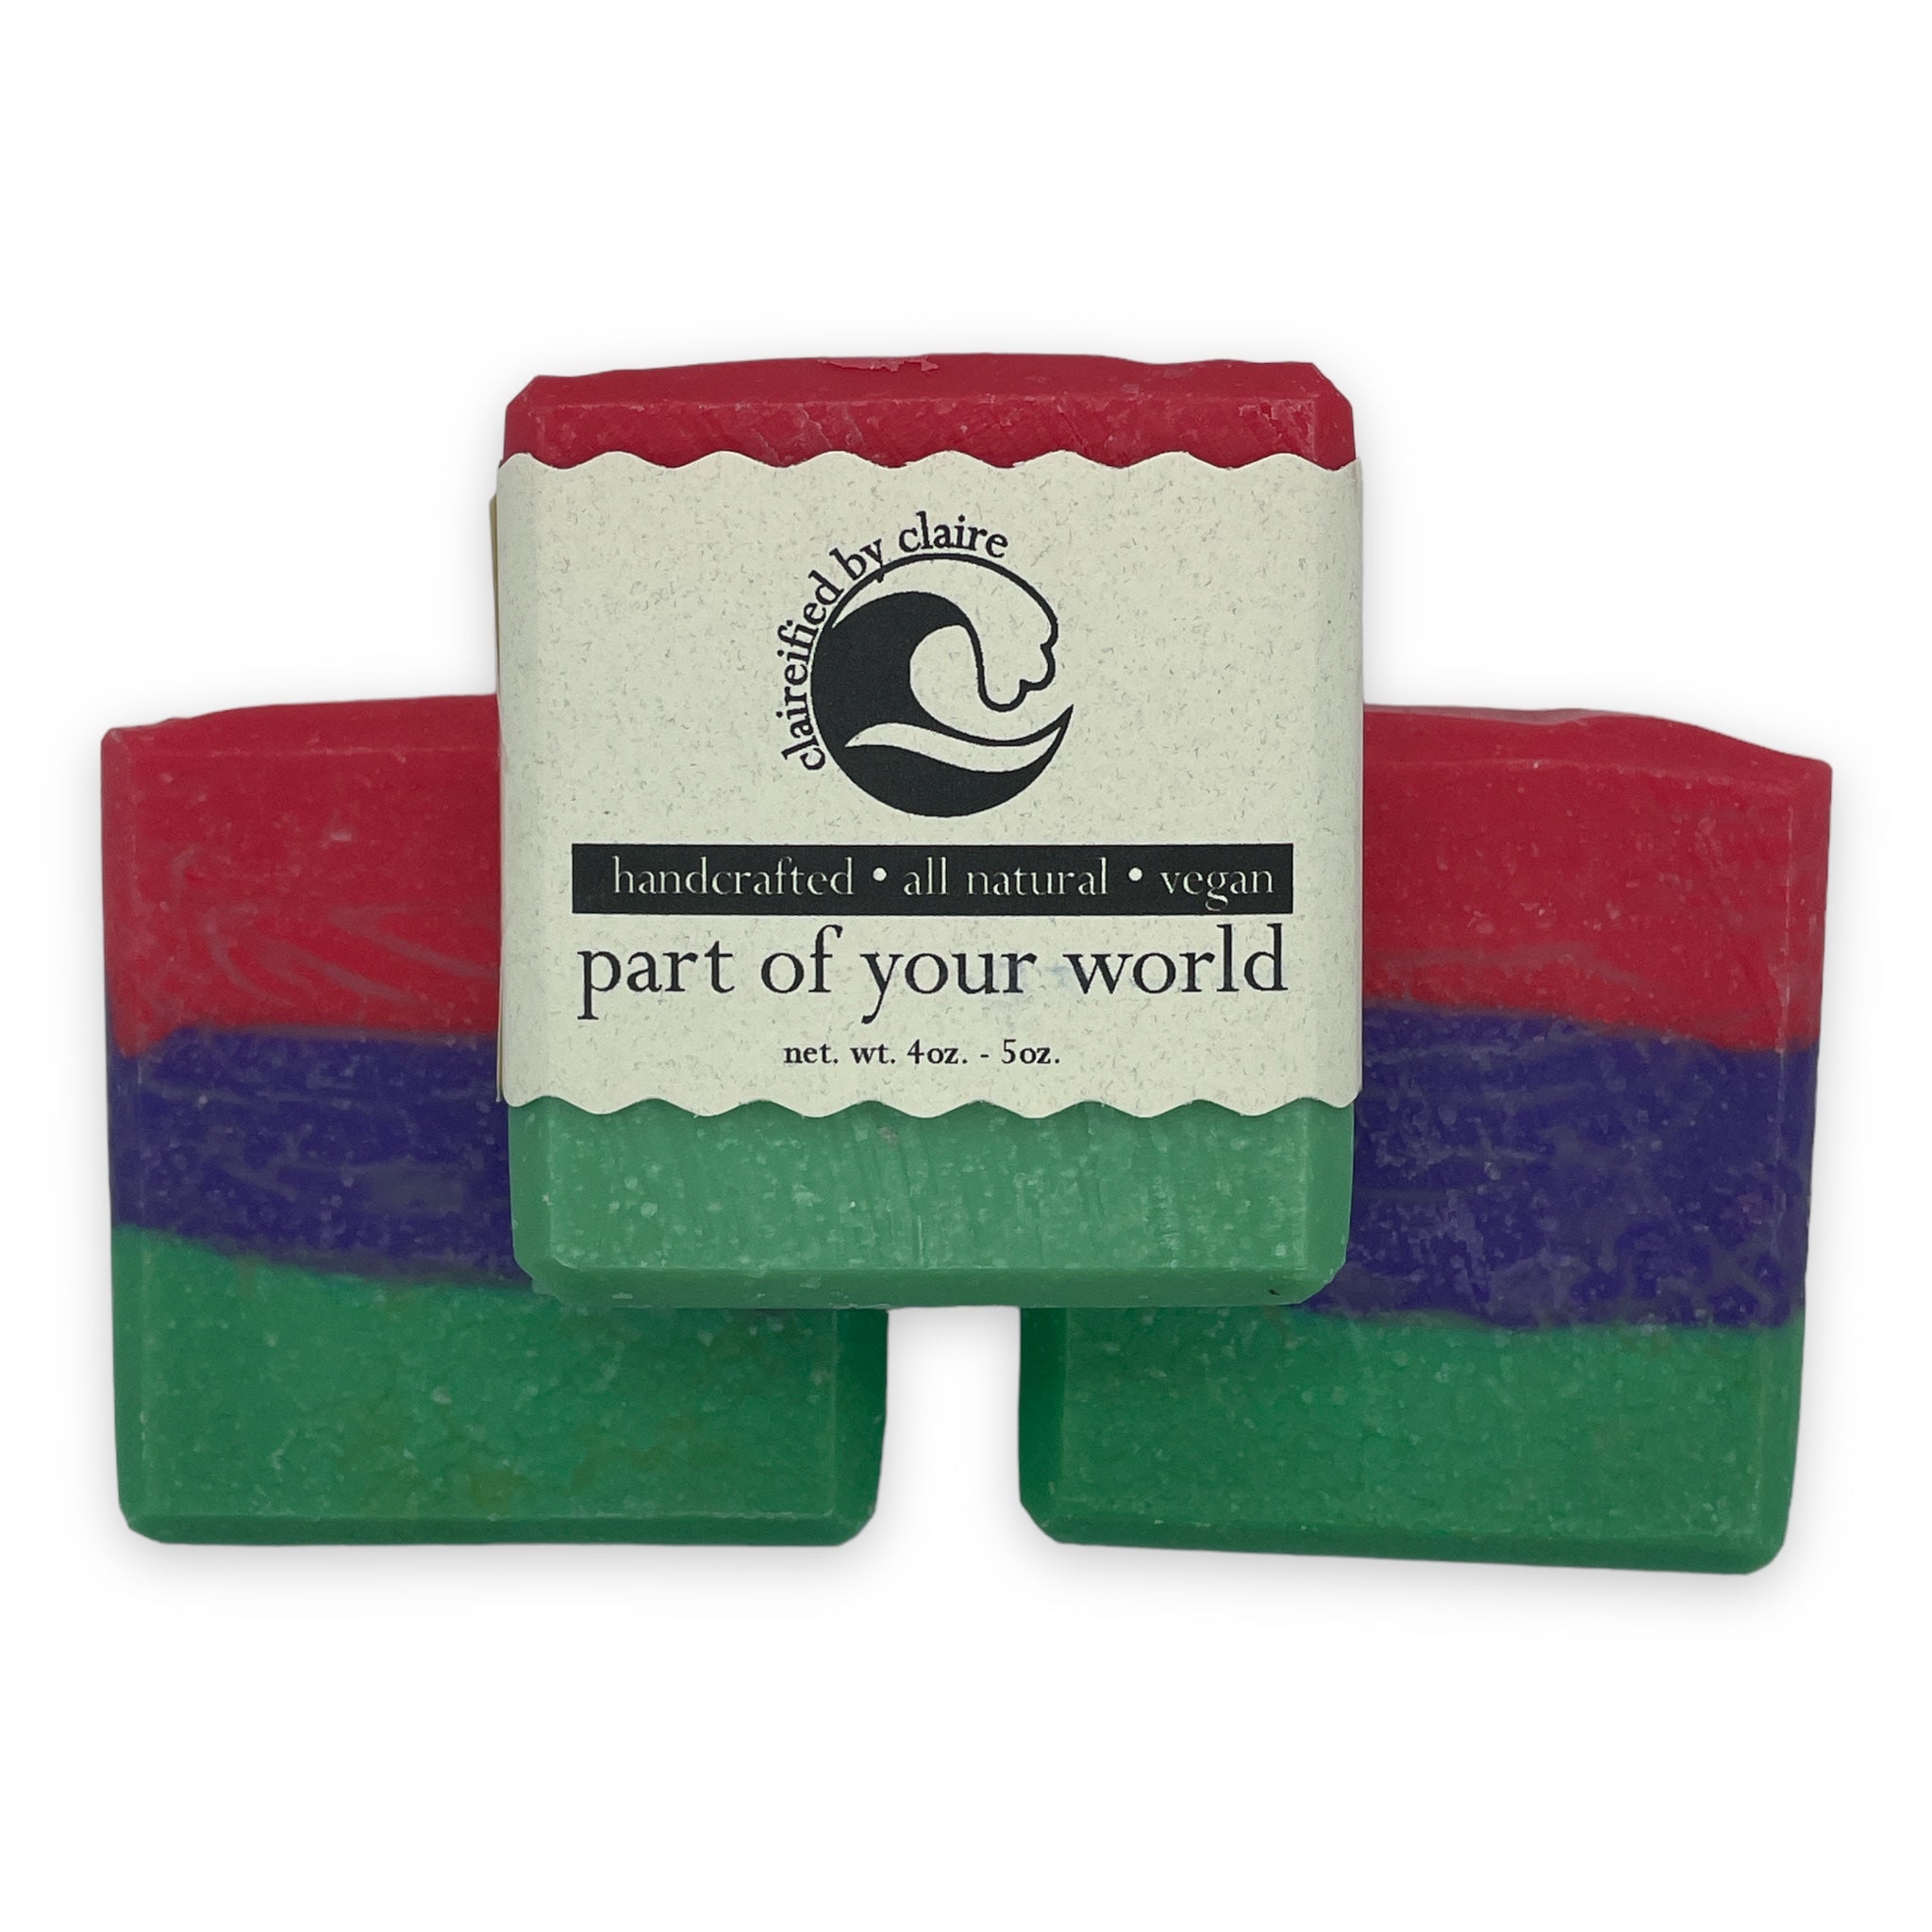 Part Of Your World handmade soap inspired by the Ariel, The Little Mermaid